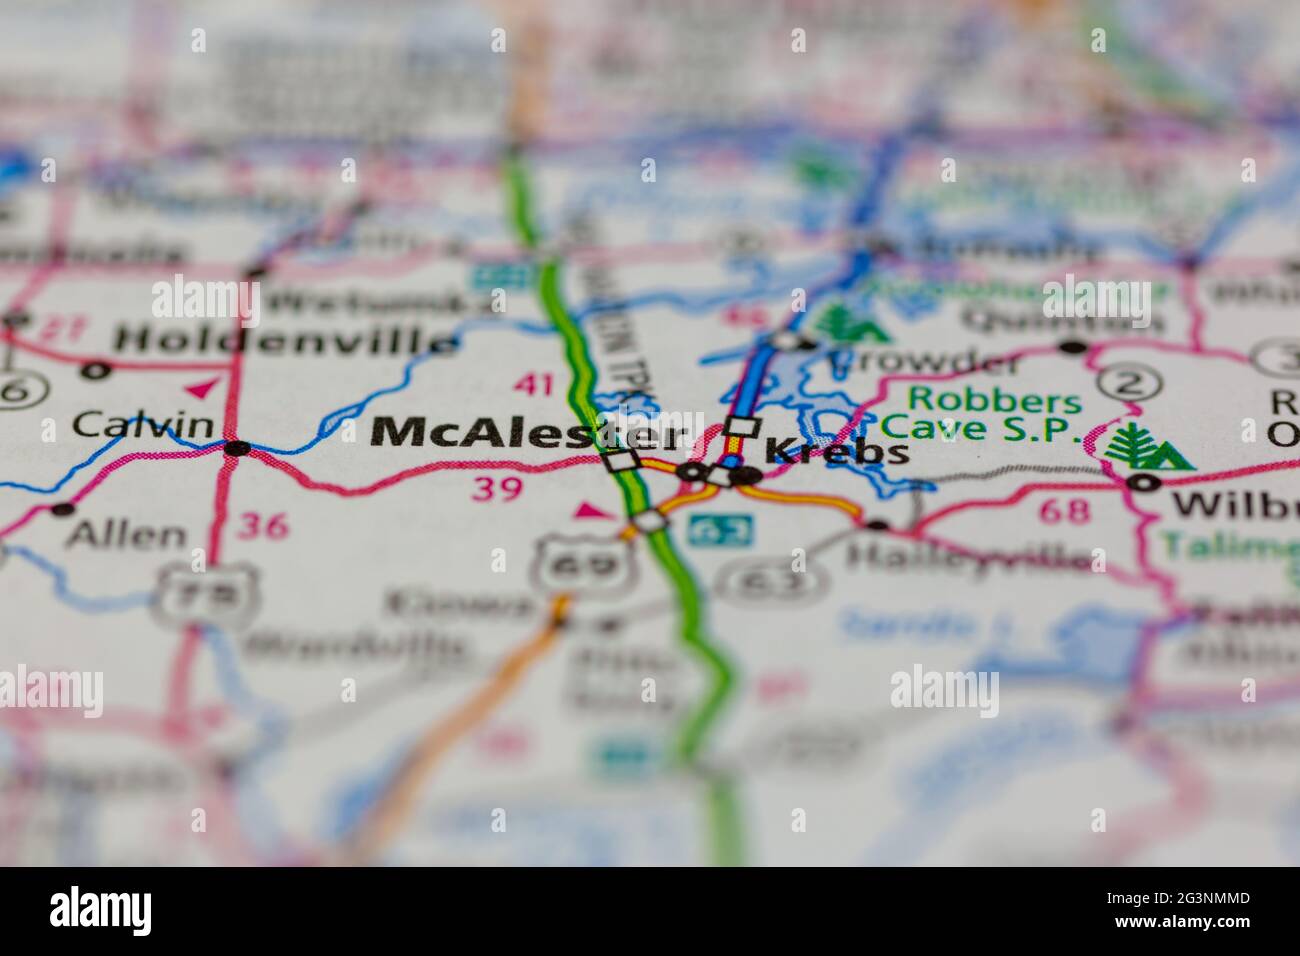 McAlester Oklahoma USA shown on a Geography map or road map Stock Photo